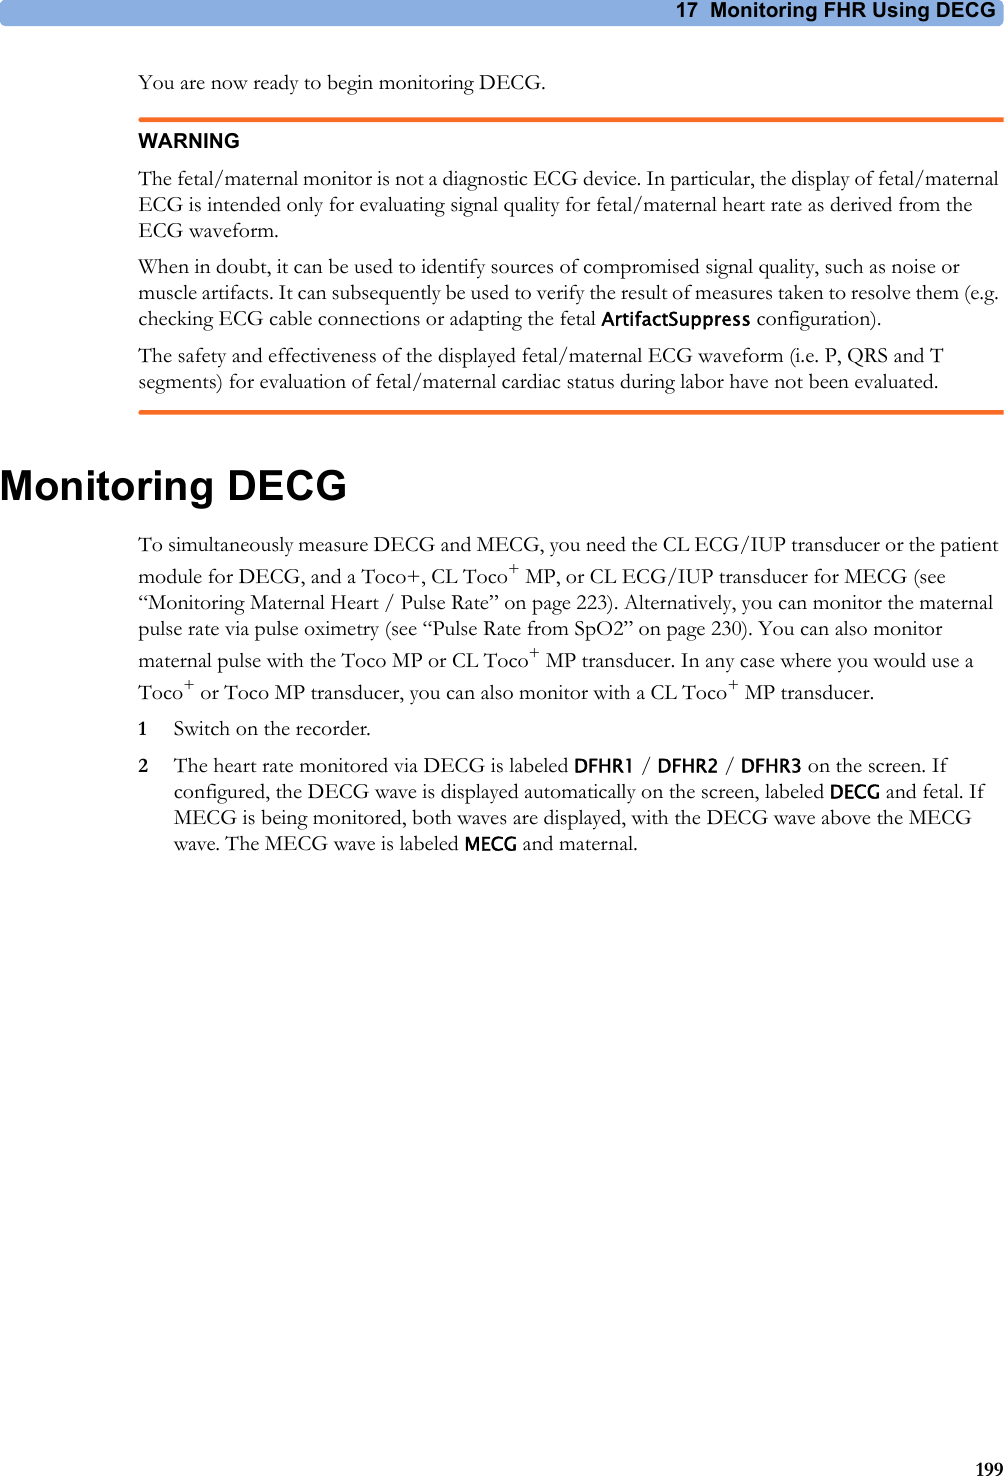 17 Monitoring FHR Using DECG199You are now ready to begin monitoring DECG.WARNINGThe fetal/maternal monitor is not a diagnostic ECG device. In particular, the display of fetal/maternal ECG is intended only for evaluating signal quality for fetal/maternal heart rate as derived from the ECG waveform.When in doubt, it can be used to identify sources of compromised signal quality, such as noise or muscle artifacts. It can subsequently be used to verify the result of measures taken to resolve them (e.g. checking ECG cable connections or adapting the fetal ArtifactSuppress configuration).The safety and effectiveness of the displayed fetal/maternal ECG waveform (i.e. P, QRS and T segments) for evaluation of fetal/maternal cardiac status during labor have not been evaluated.Monitoring DECGTo simultaneously measure DECG and MECG, you need the CL ECG/IUP transducer or the patient module for DECG, and a Toco+, CL Toco+MP, or CL ECG/IUP transducer for MECG (see “Monitoring Maternal Heart / Pulse Rate” on page 223). Alternatively, you can monitor the maternal pulse rate via pulse oximetry (see “Pulse Rate from SpO2” on page 230). You can also monitor maternal pulse with the Toco MP or CL Toco+MP transducer. In any case where you would use a Toco+ or Toco MP transducer, you can also monitor with a CL Toco+MP transducer.1Switch on the recorder.2The heart rate monitored via DECG is labeled DFHR1 / DFHR2 / DFHR3 on the screen. If configured, the DECG wave is displayed automatically on the screen, labeled DECG and fetal. If MECG is being monitored, both waves are displayed, with the DECG wave above the MECG wave. The MECG wave is labeled MECG and maternal.